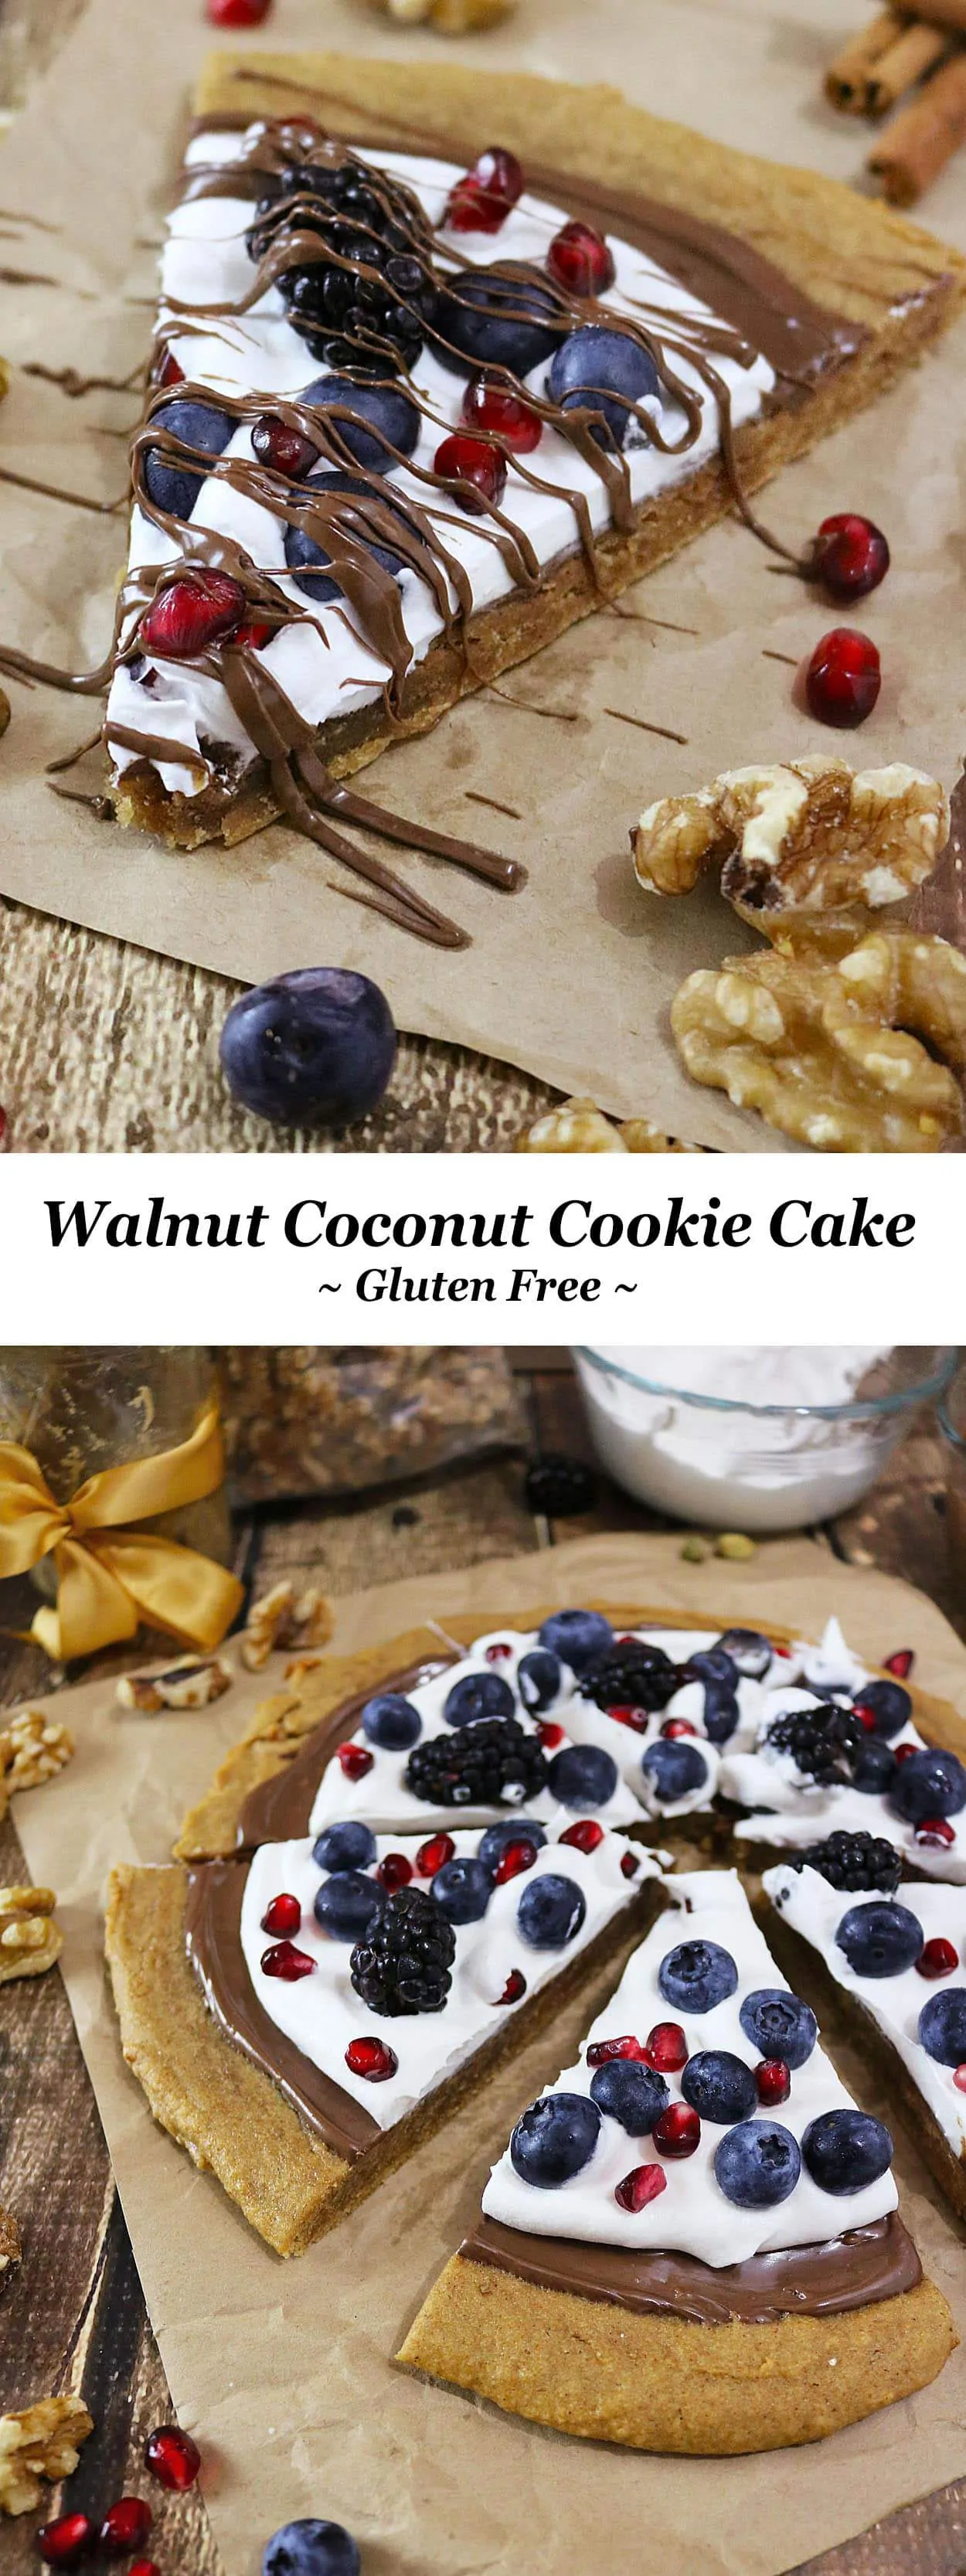 Spiced Walnut Coconut Cookie Cake with chocolate, blueberries and pomegranate - perfect for the fourth of July